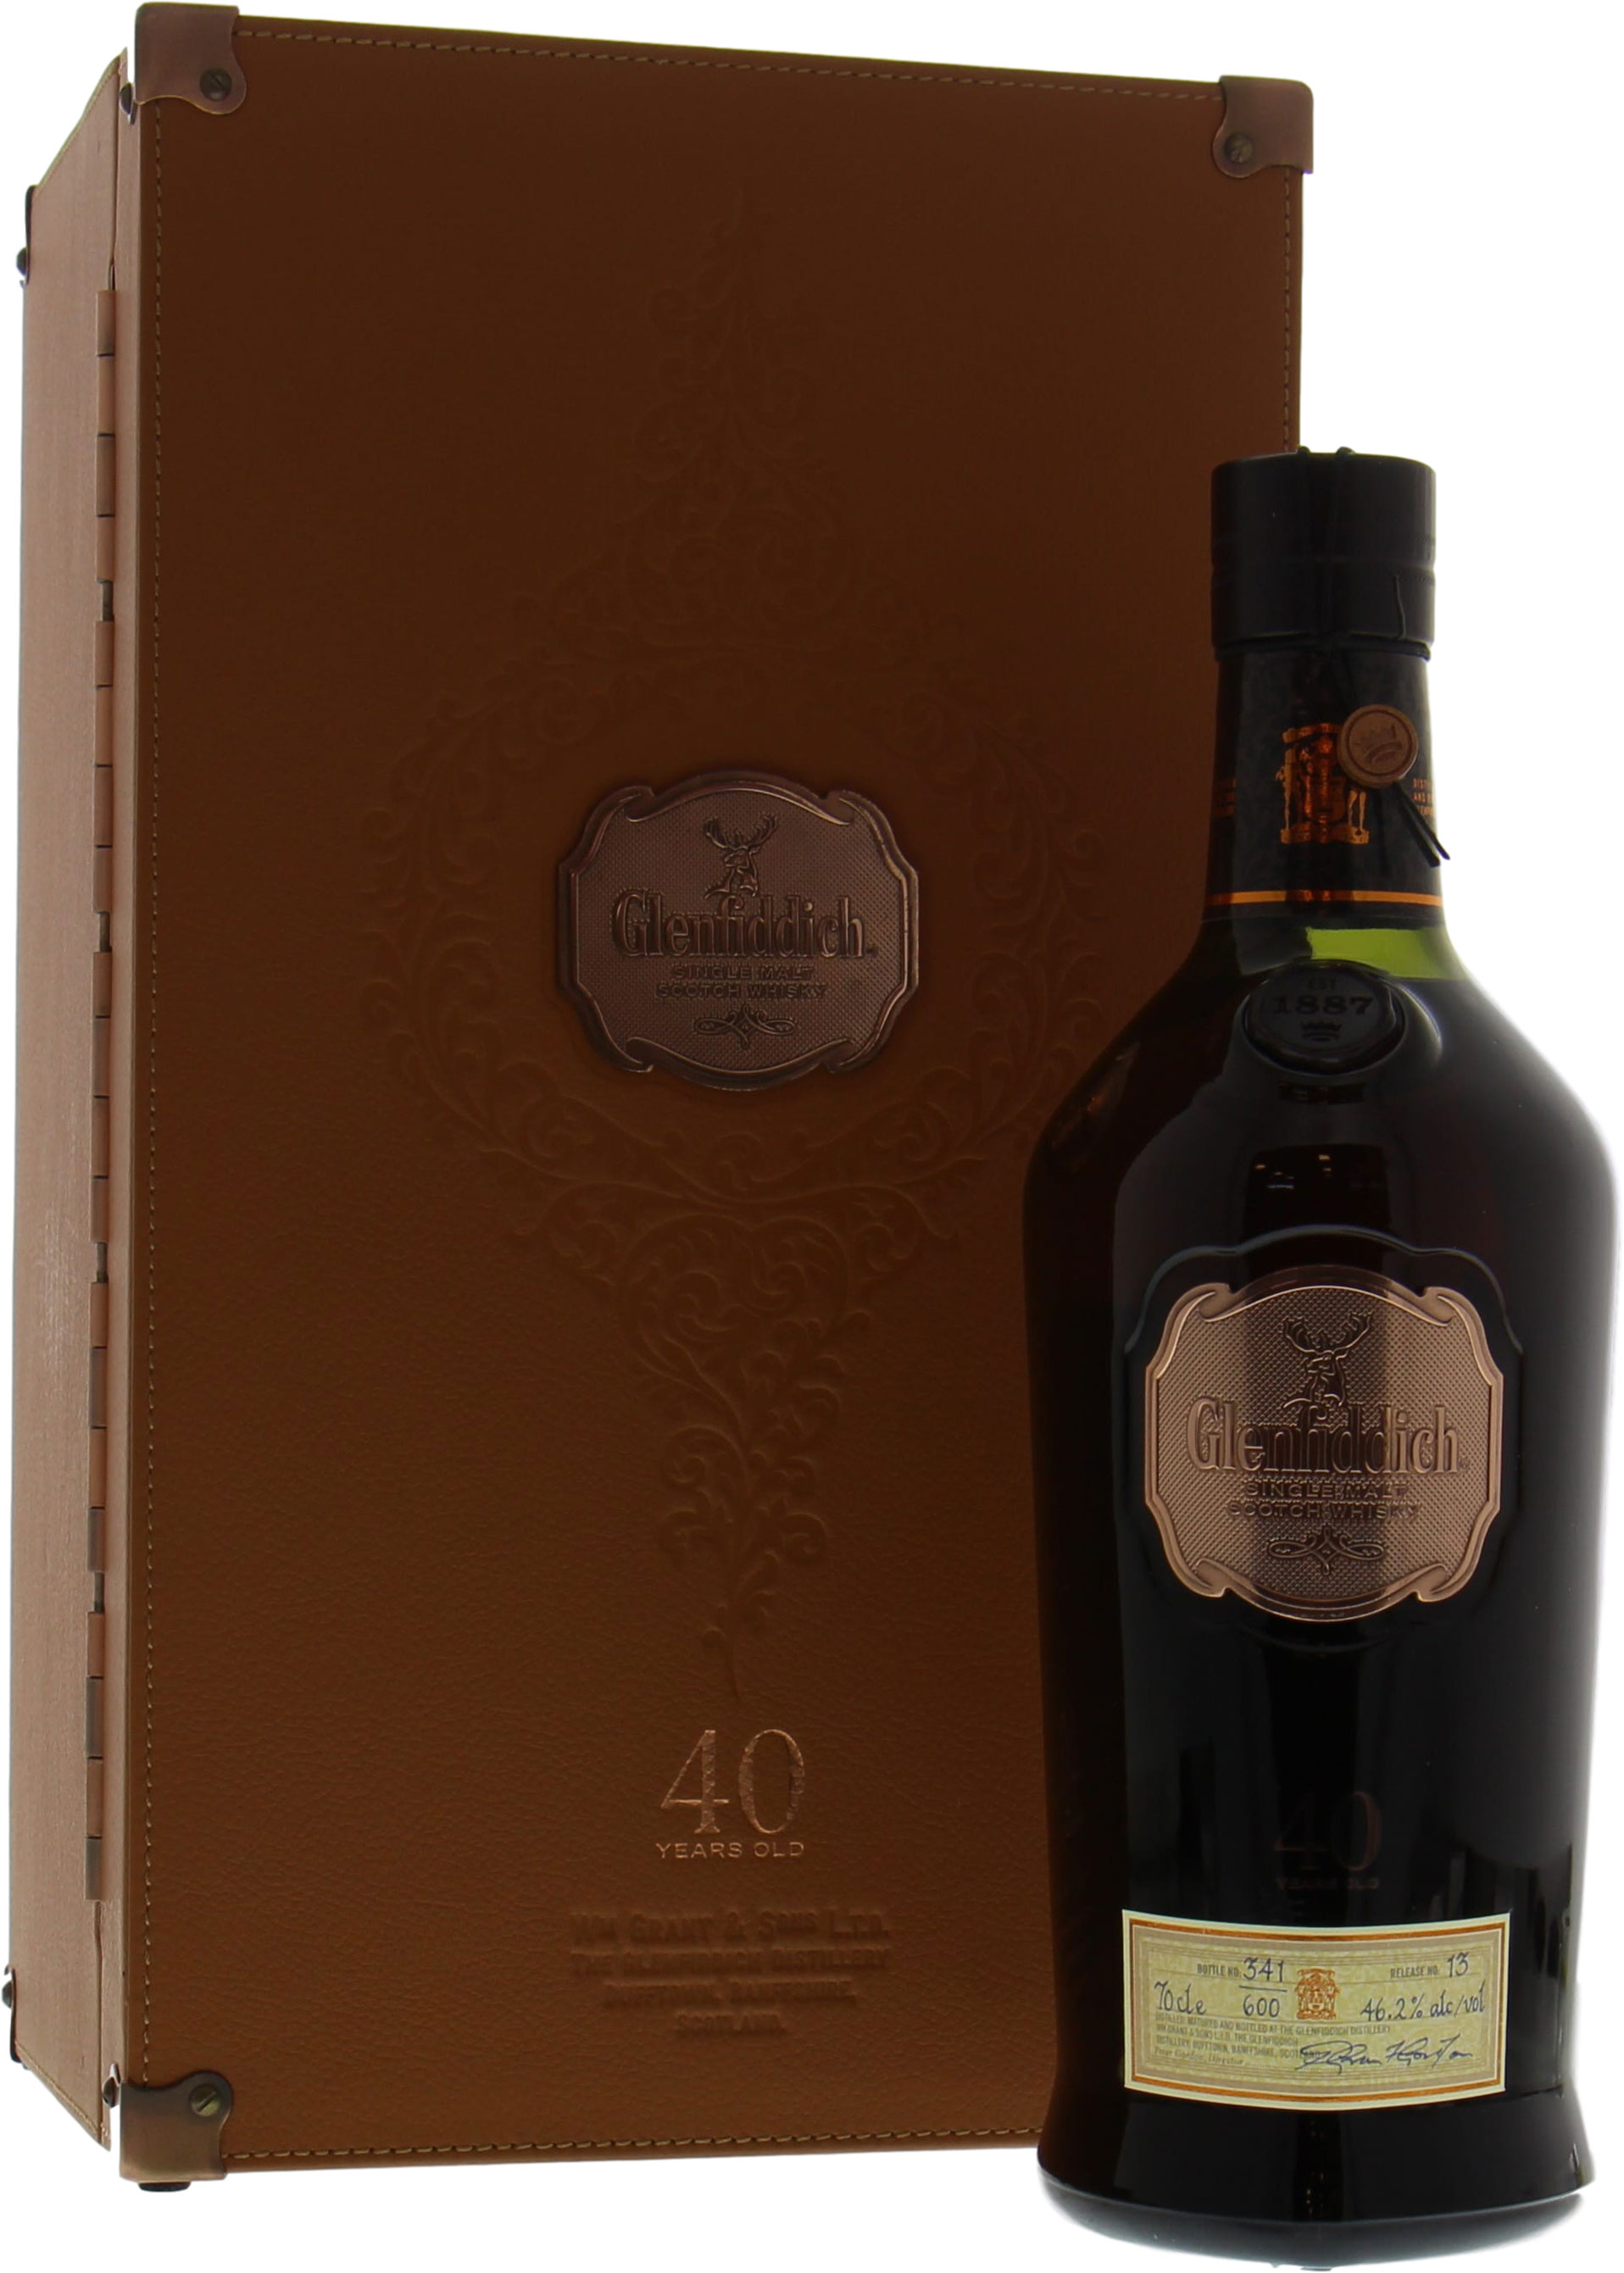 Glenfiddich - 40 Years Old  Release No.13 46.2% NV In Original Wooden Case